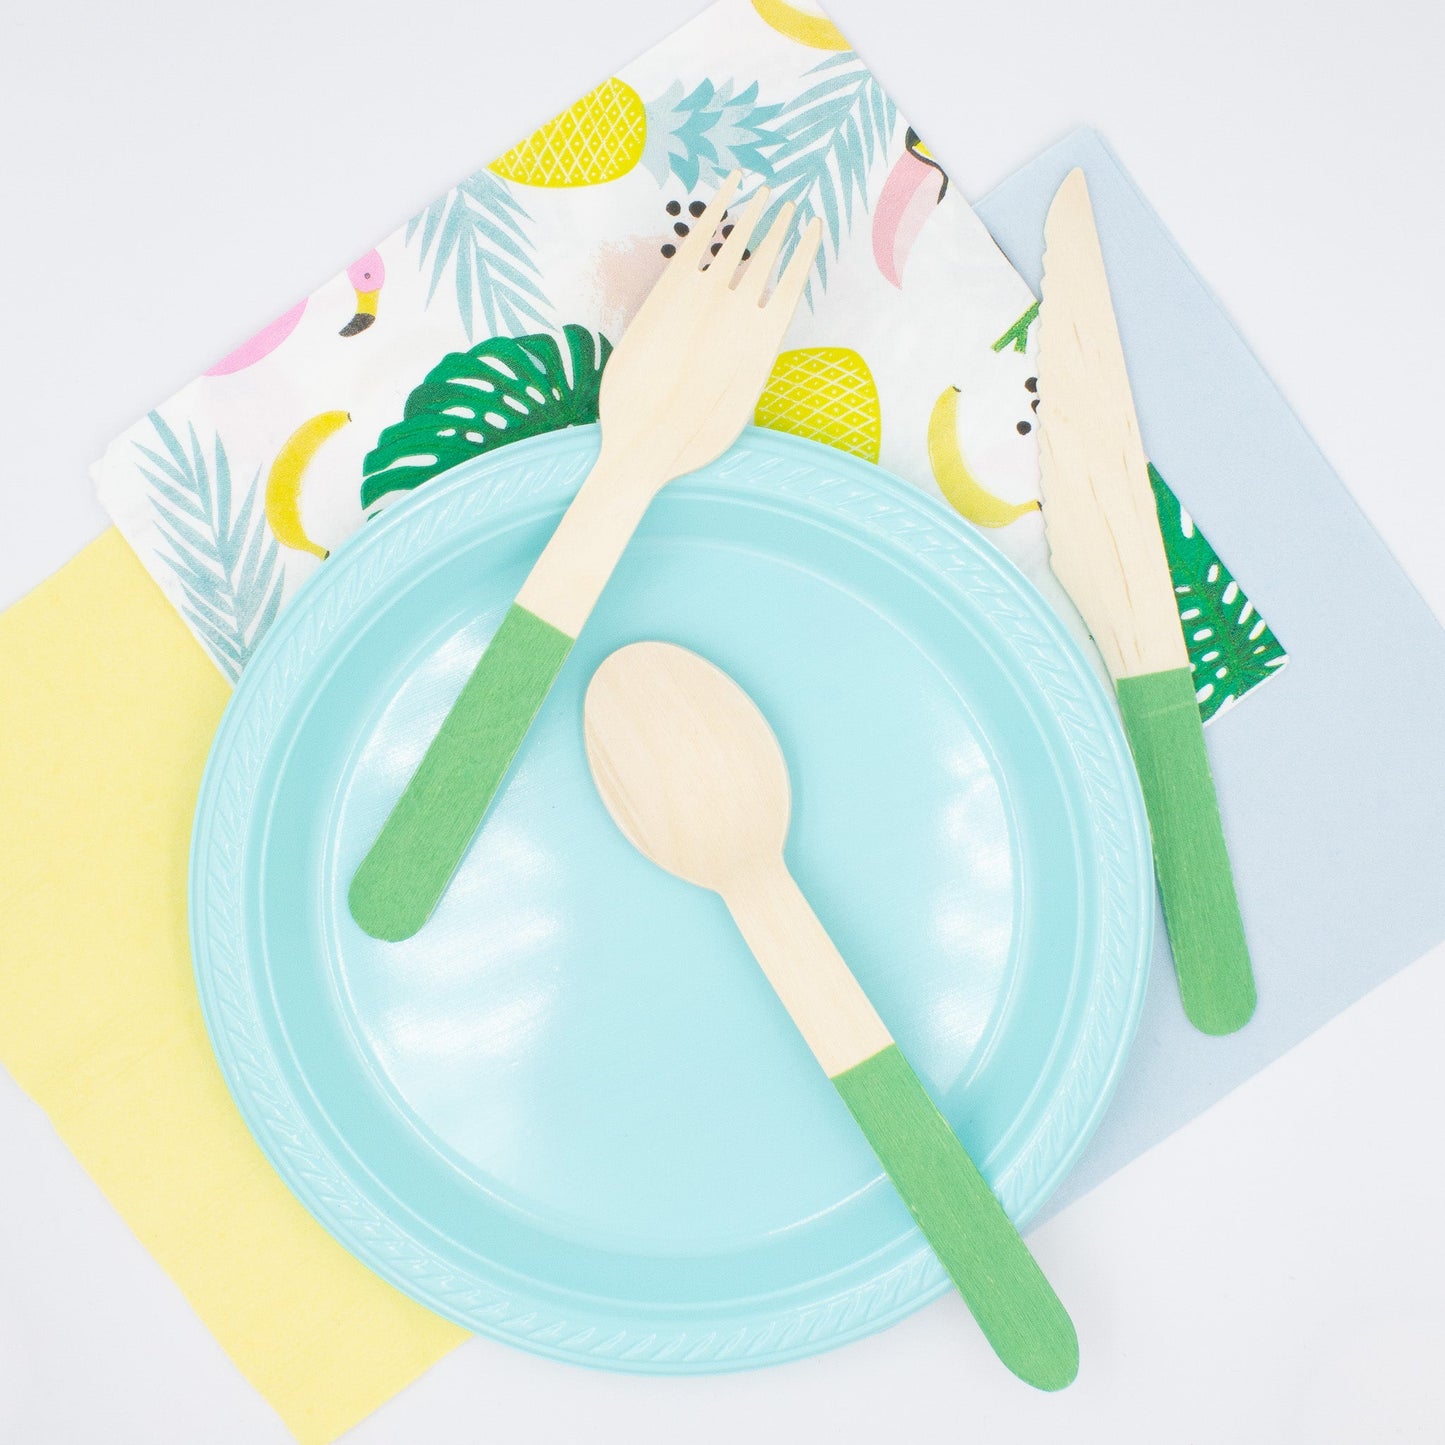 Green Wooden Utensils - Spoon, Fork, Knife (Set of 24) - Ellie's Party Supply